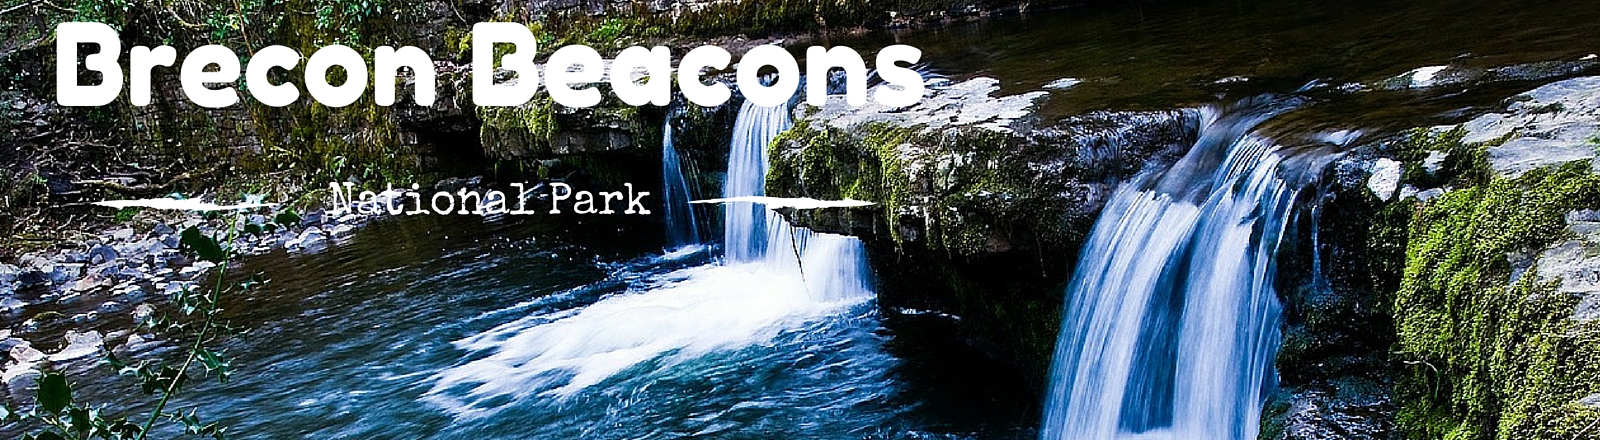 Brecon Beacons National Park | National Parks Guy